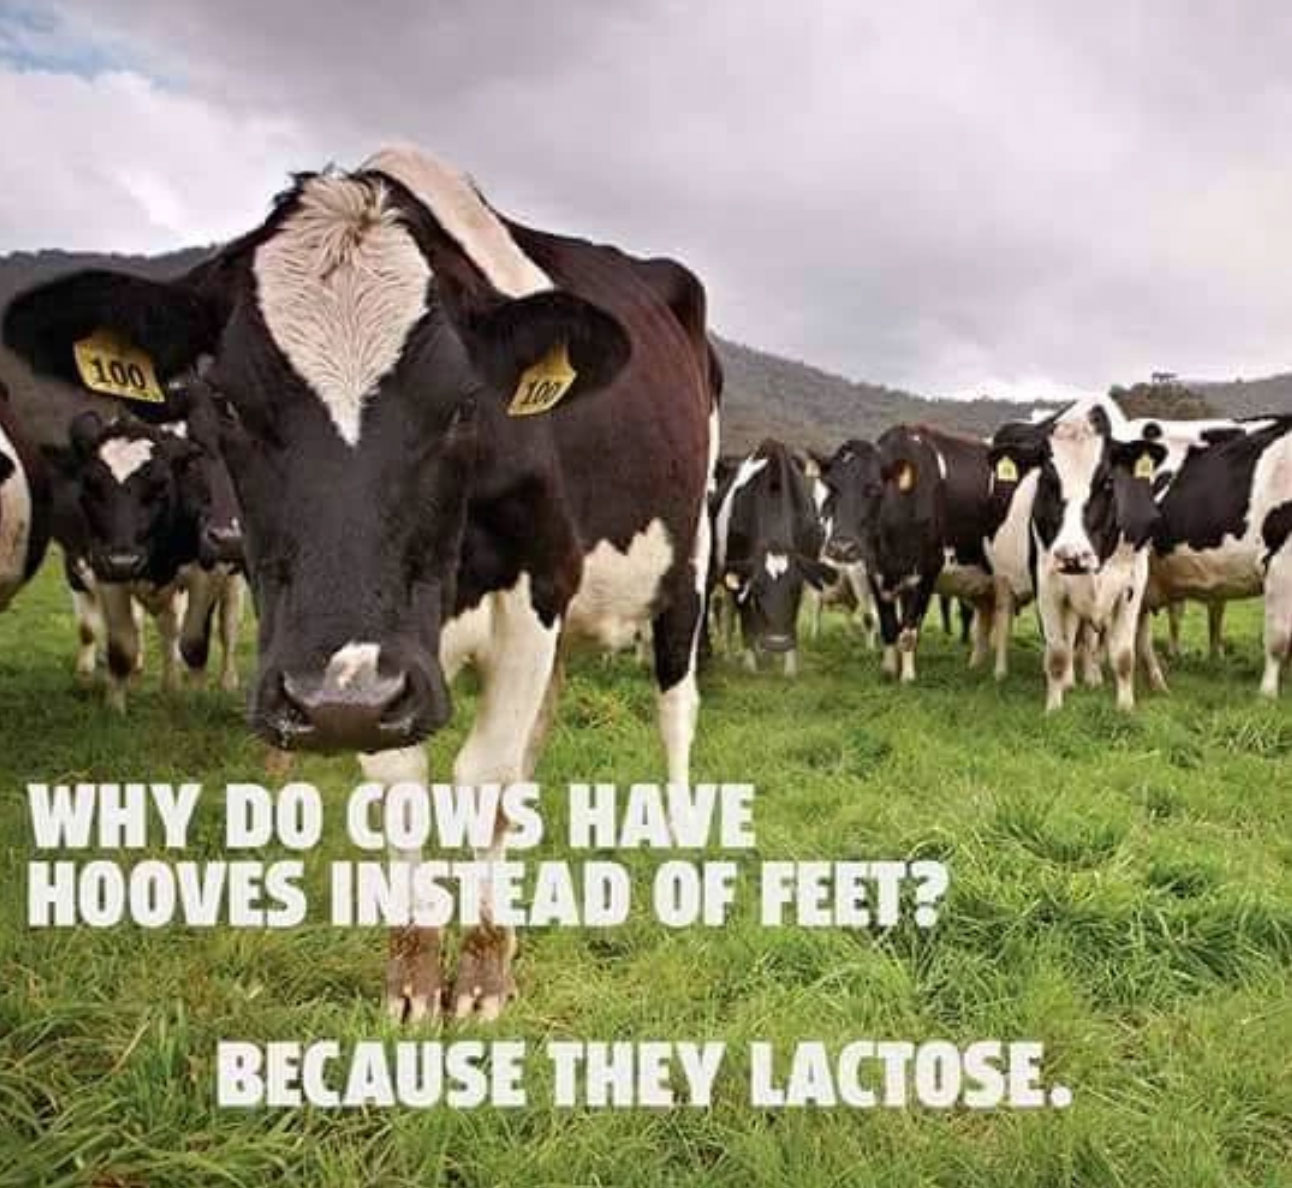 funny country jokes - W Why Do Cows Have Hooves Instead Of Feet? Because They Lactose.